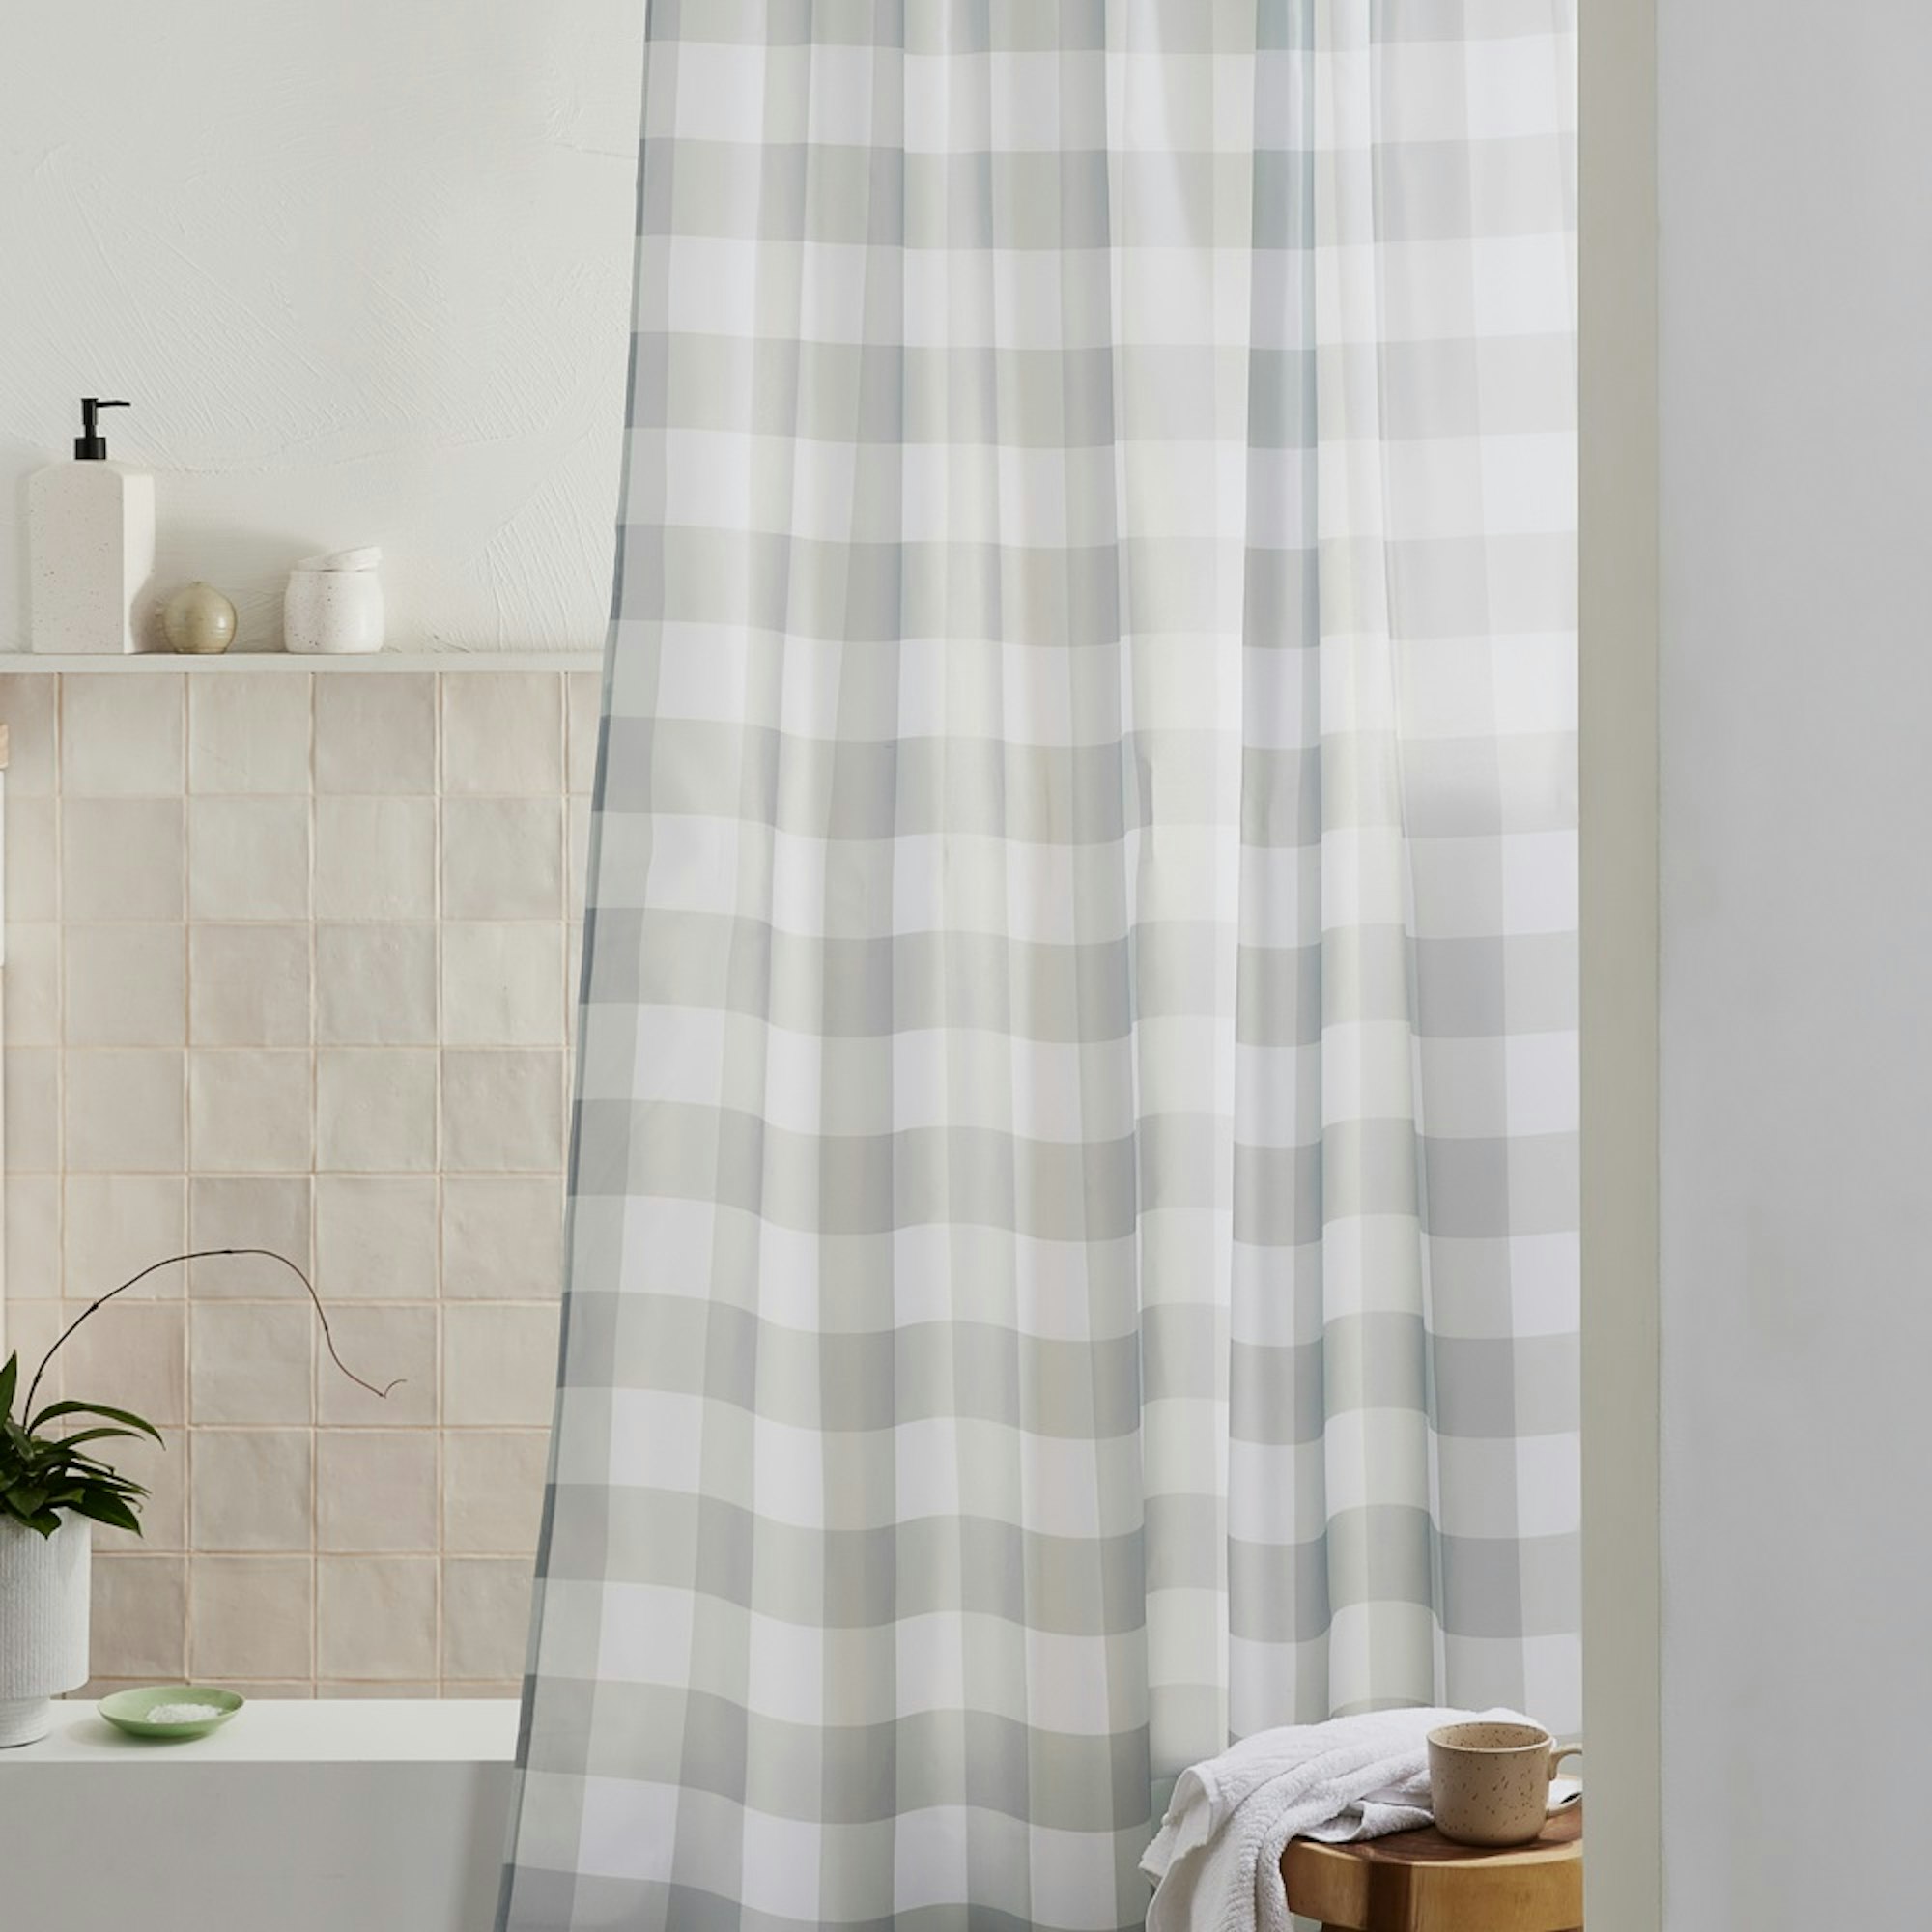 Green and white gingham shower curtain